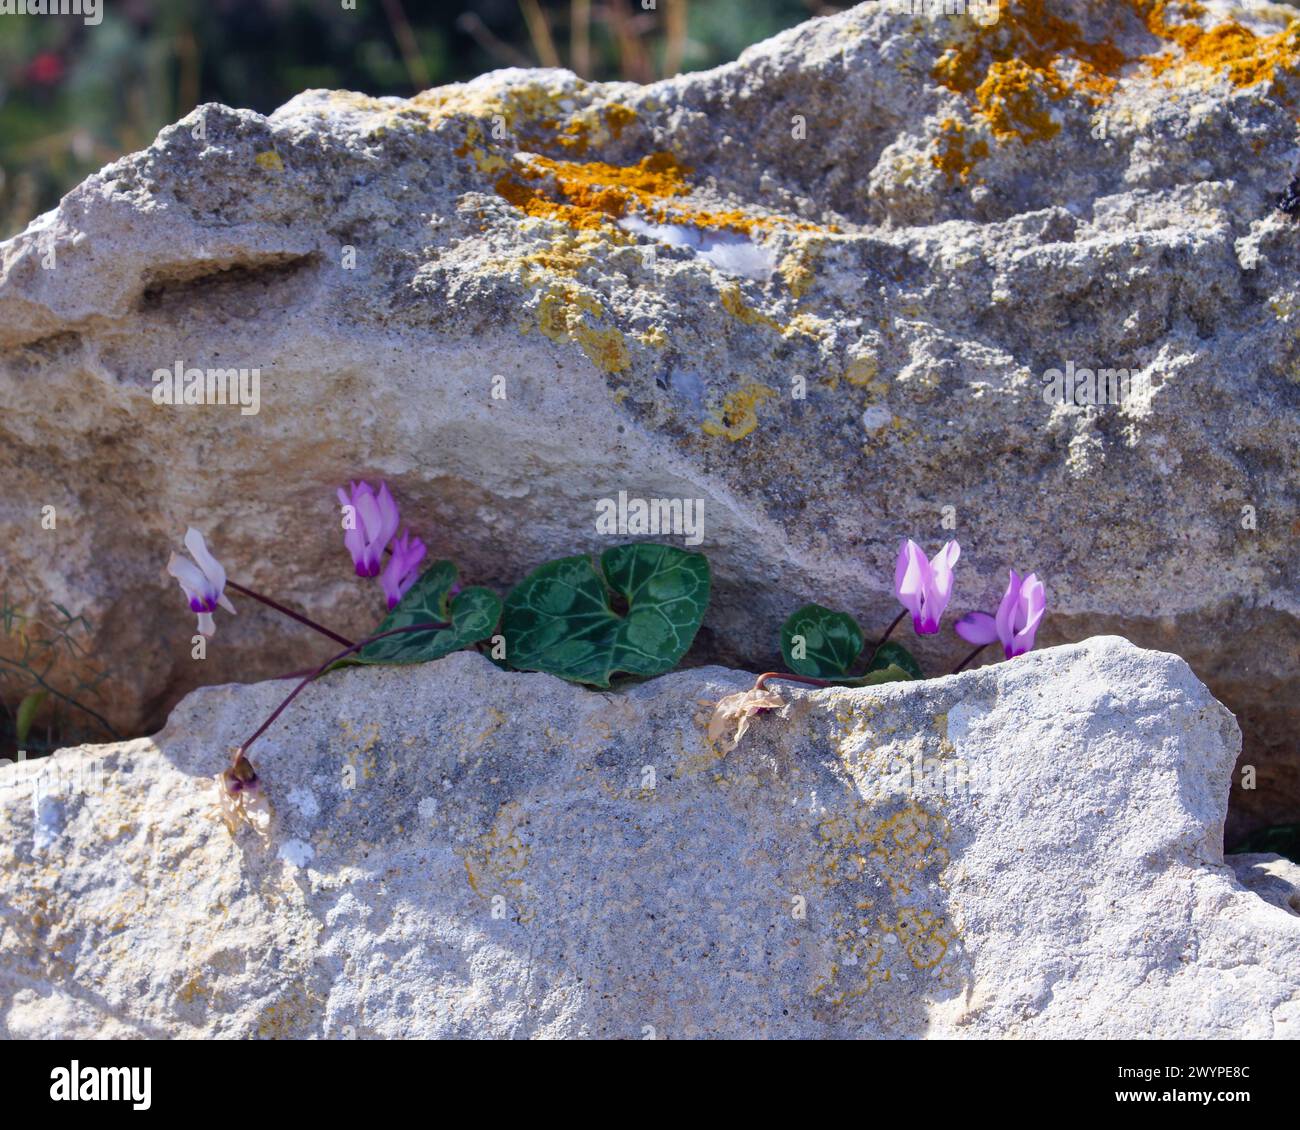 Flowers of the Persian cyclamen (Cyclamen persicum) in a rock crevice, natural habitat on Cyprus Stock Photo